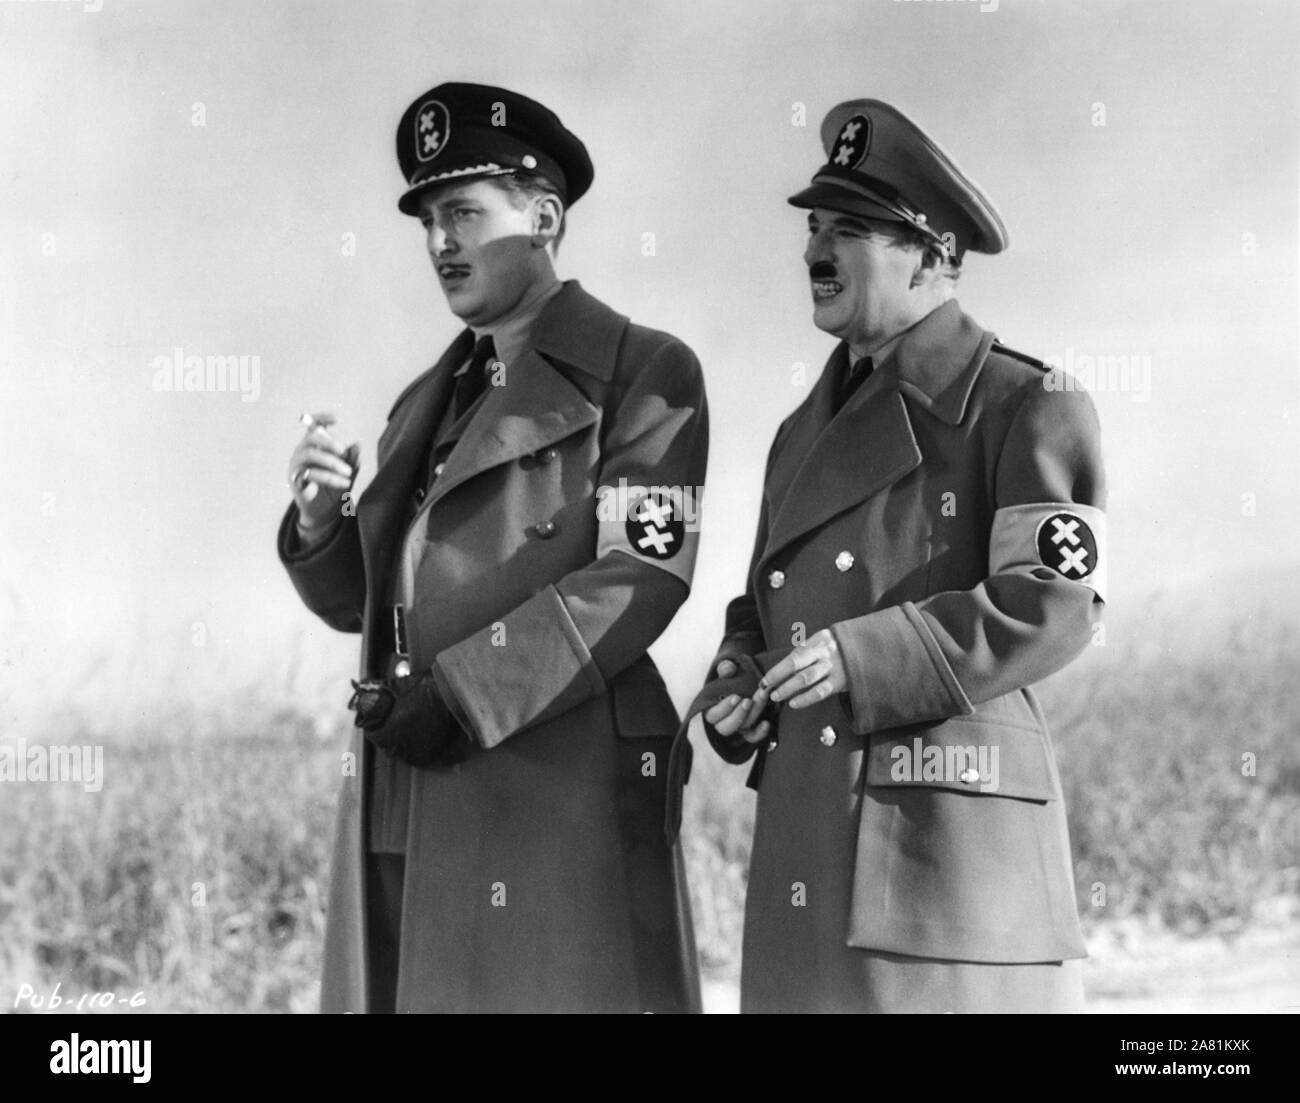 REGINALD GARDINER as Schultz and CHARLIE CHAPLIN as Adenoid Hynkel Dictator  of Tomania on set candid filming THE GREAT DICTATOR 1940 director / writer  Charles Chaplin photo by William Wallace One Production